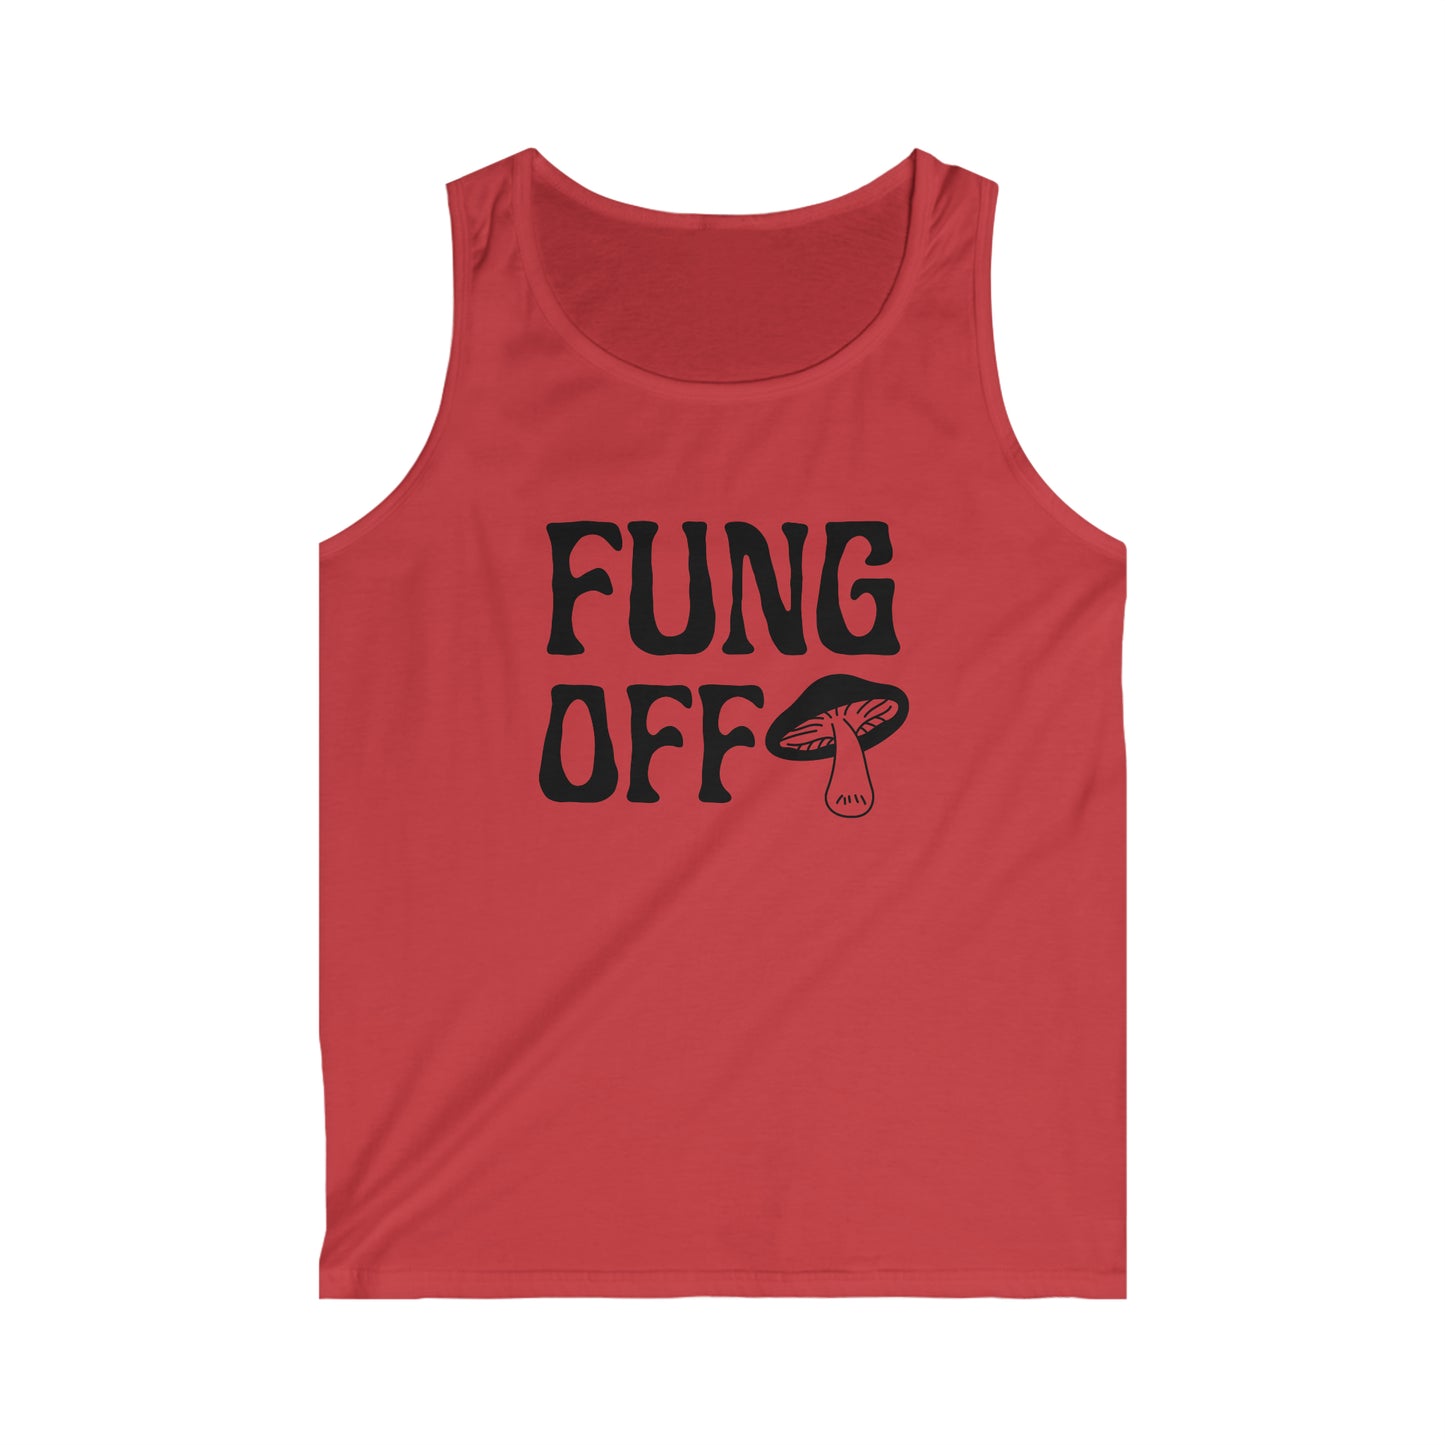 Fung Off Men's Softstyle Tank Top